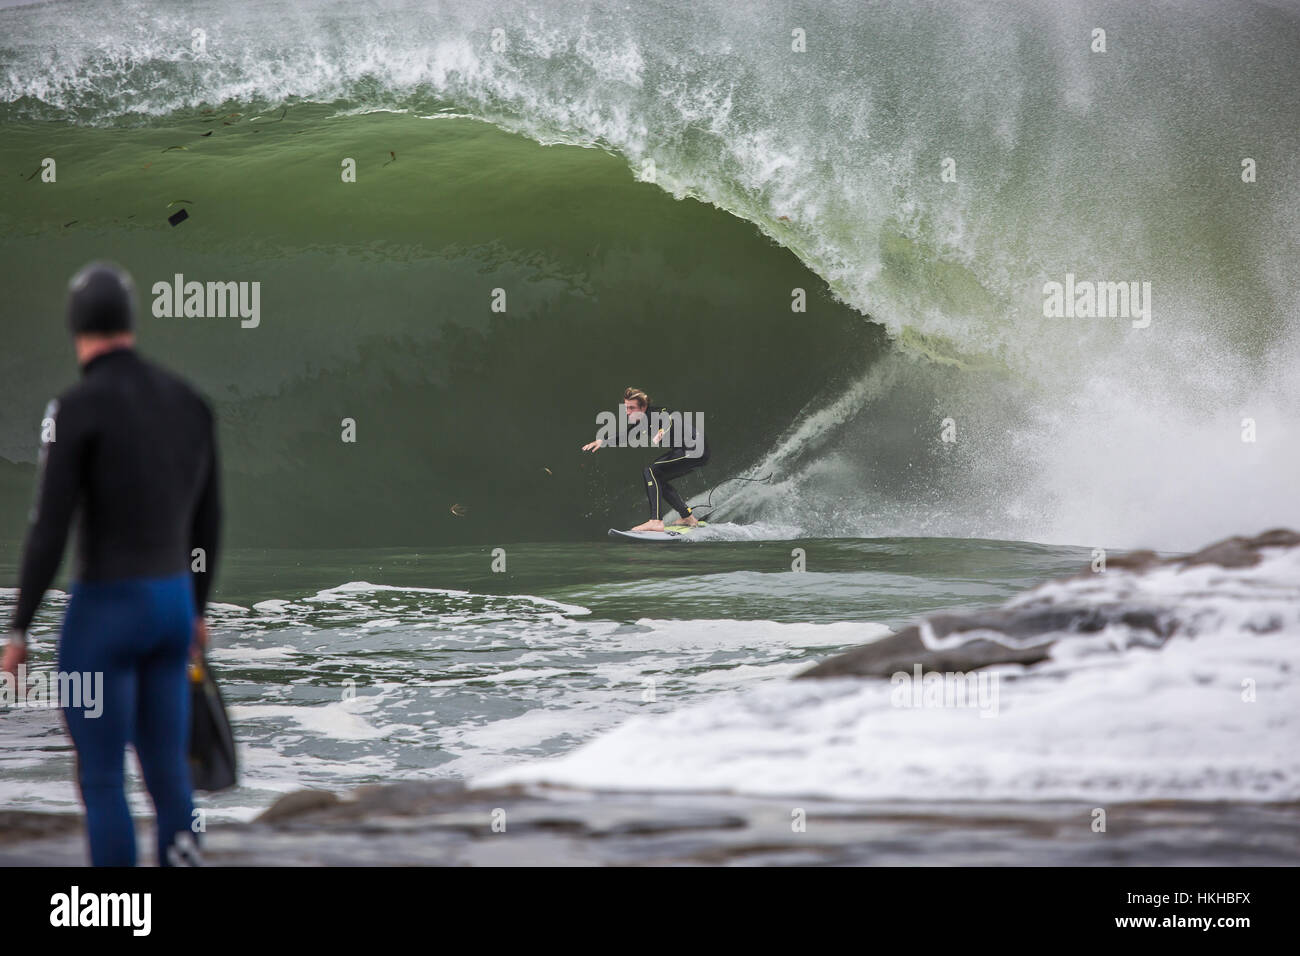 Pro Surfer Riley Laing At The 16 Red Bull Cape Fear Big Wave Surfing Competition Near Sydney Australia Stock Photo Alamy